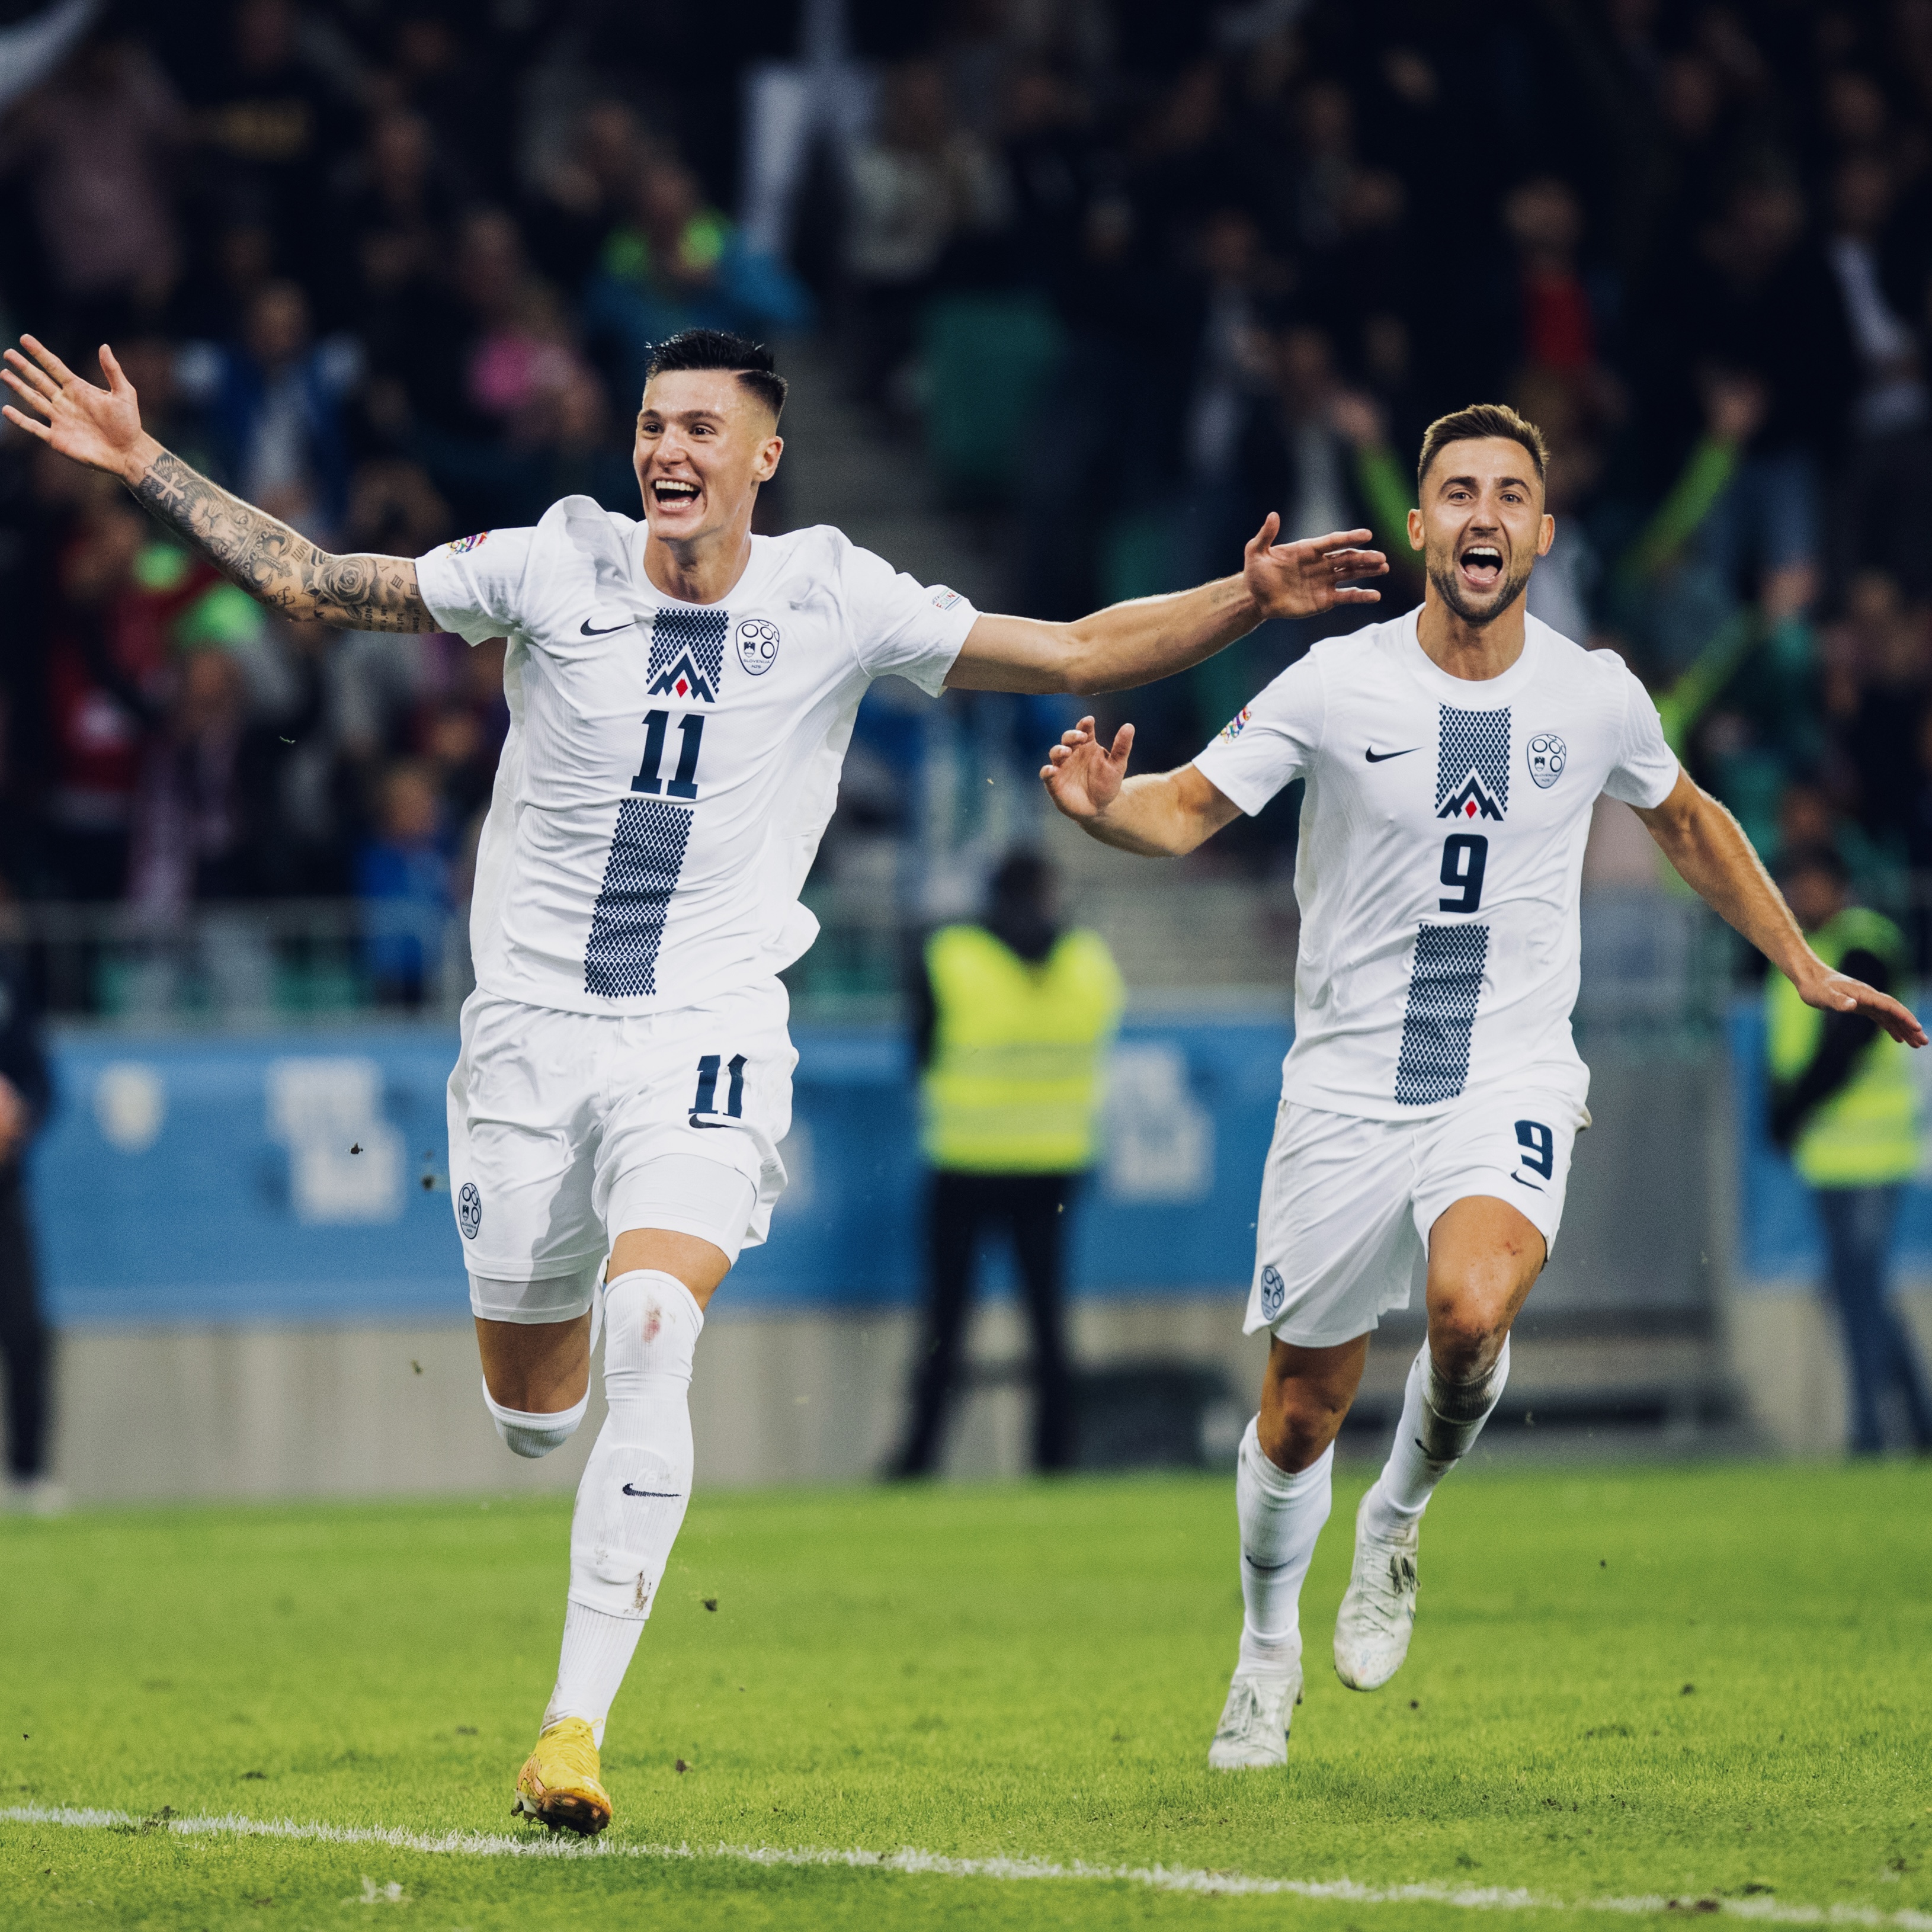 Haaland goal in vain as Slovenia defeat Norway 2-1 in the Nations League